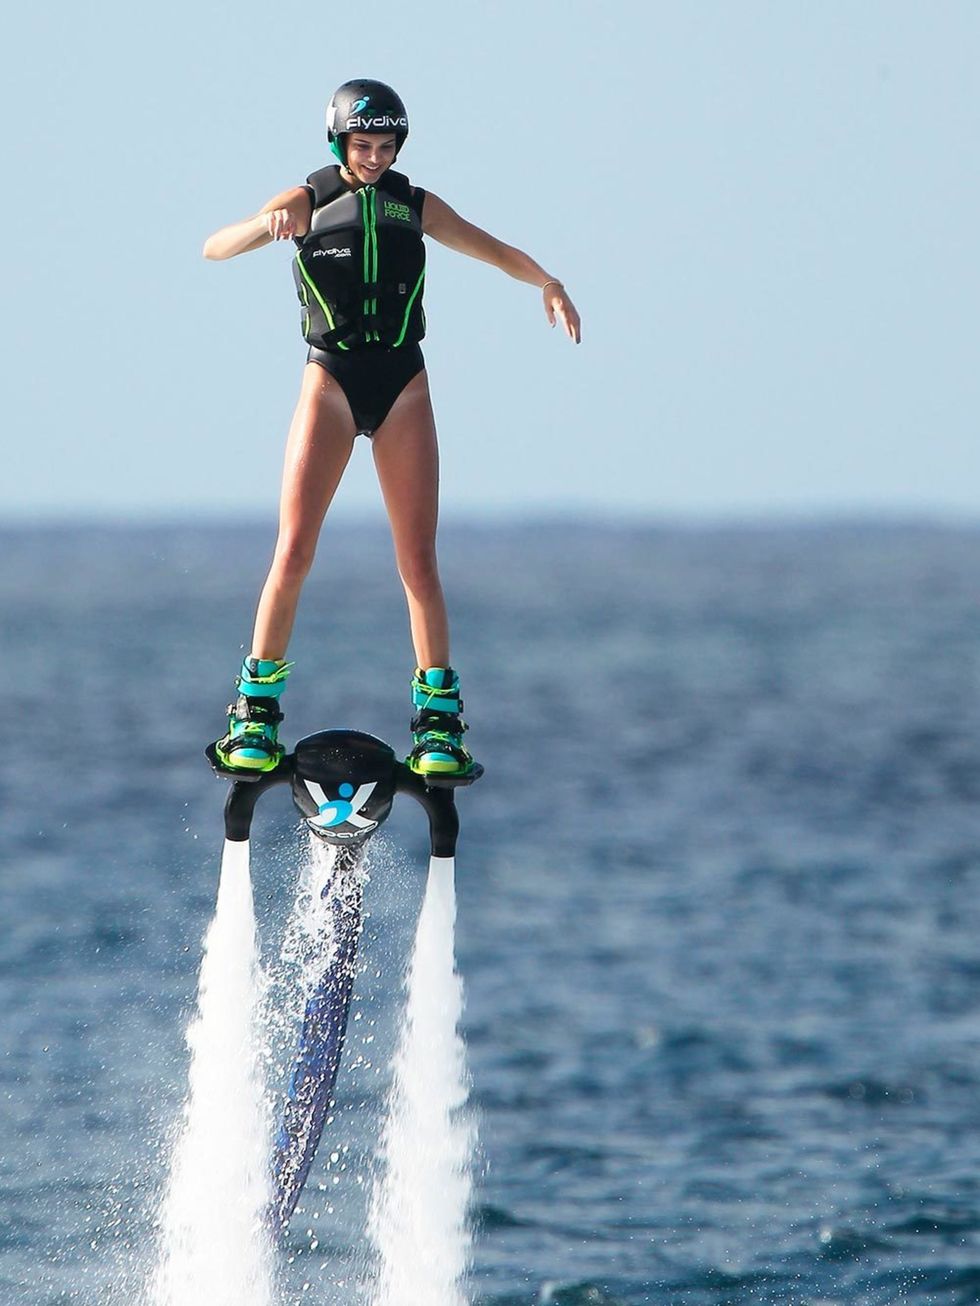 Kendall and Kylie Jenner both took turns on the jet pack whilst on holiday with the family in St Barths, August 2015.